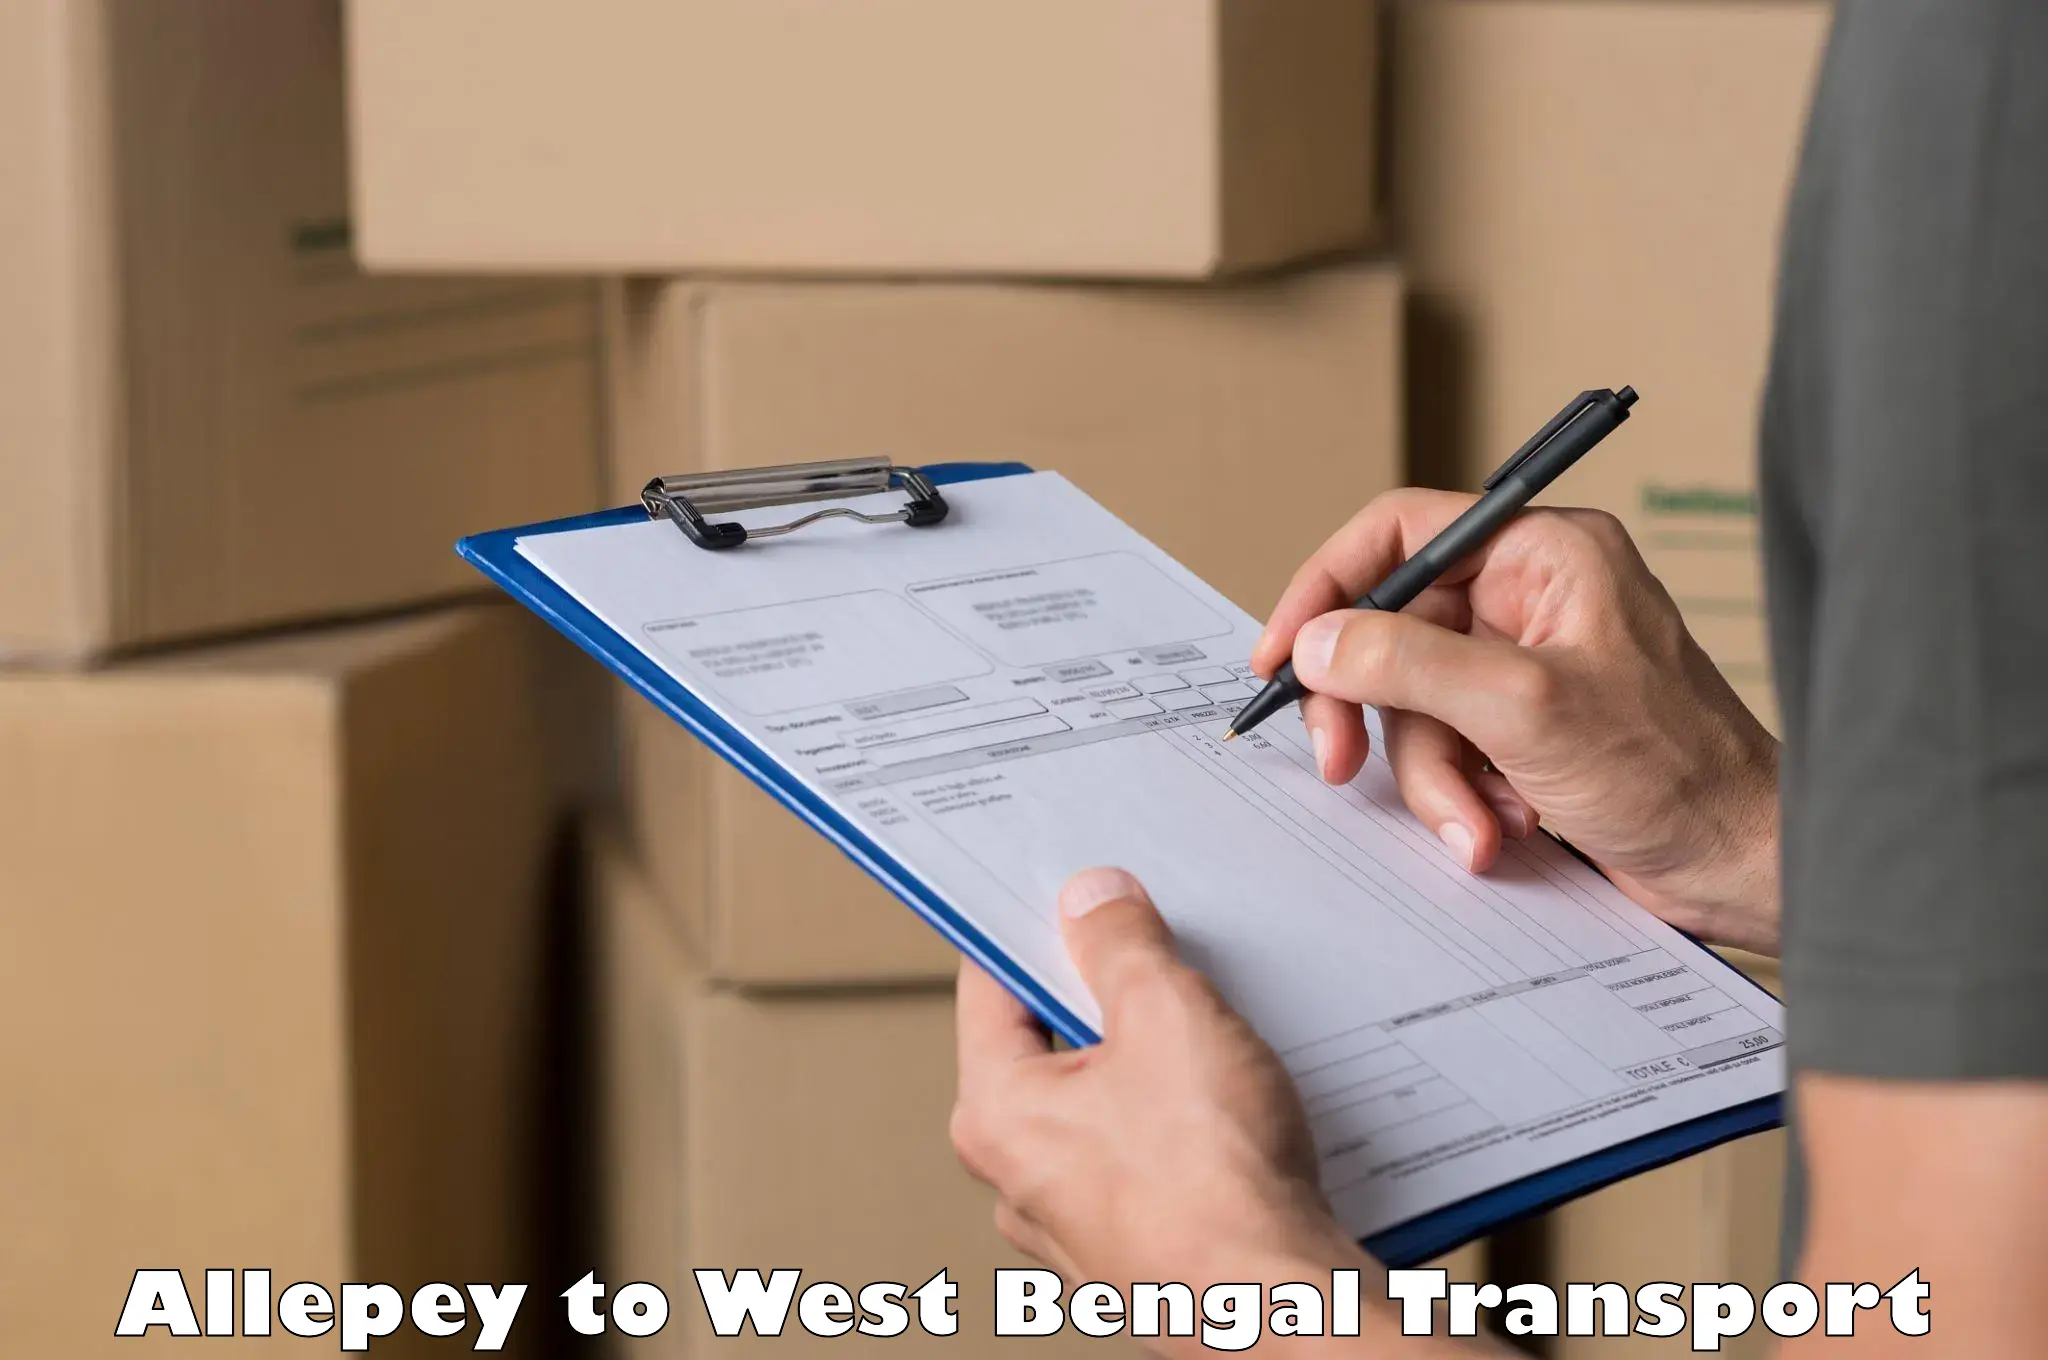 Furniture transport service Allepey to West Bengal